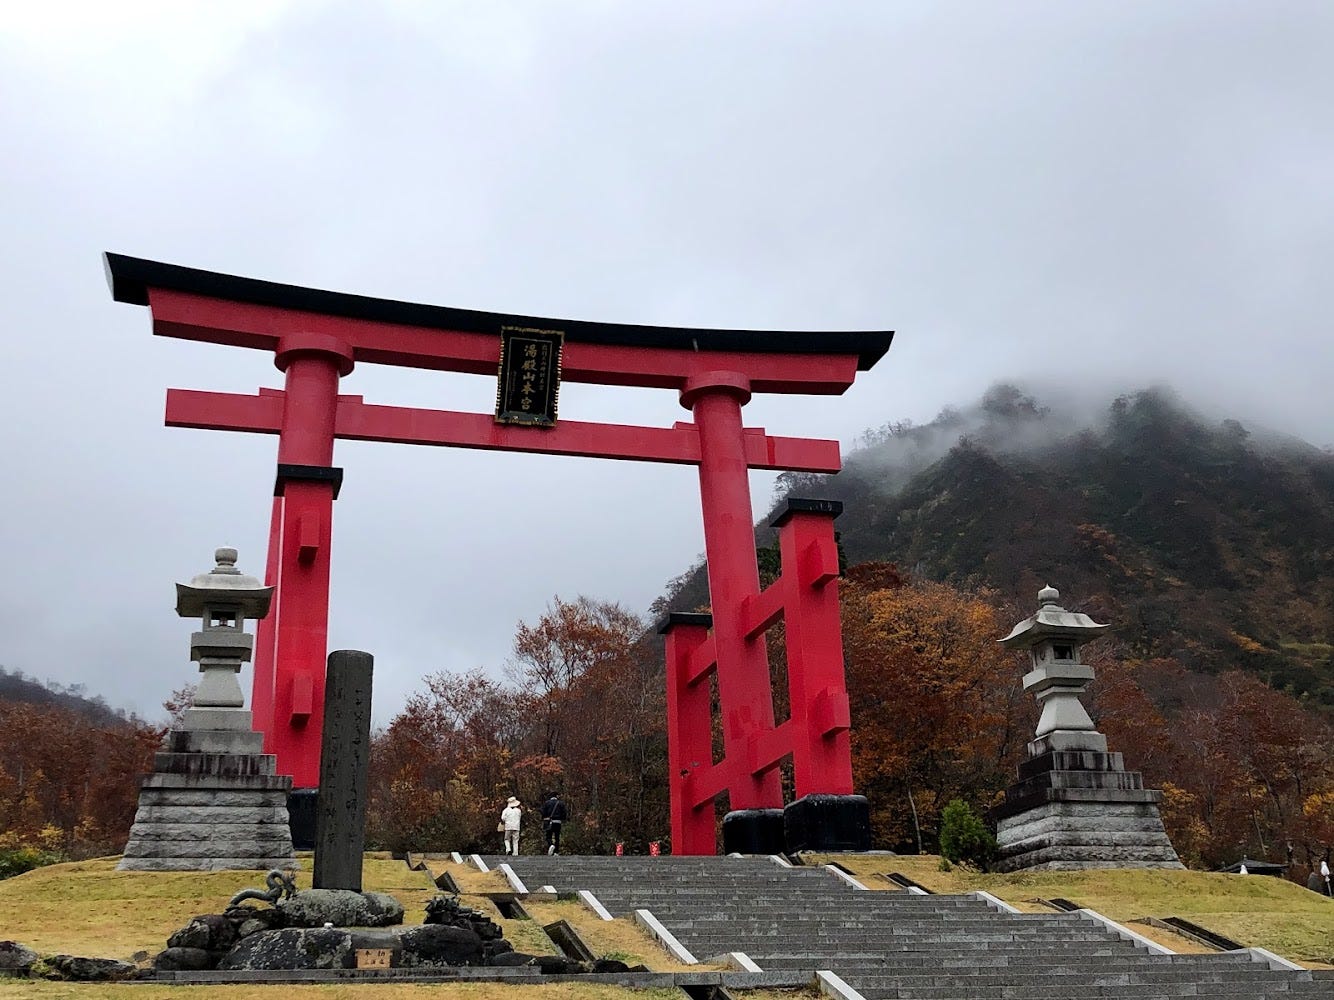 Mt. Yudono’s shrine gates tower over a visitor as the fog of autumn shrouds over a nearby mountain peak